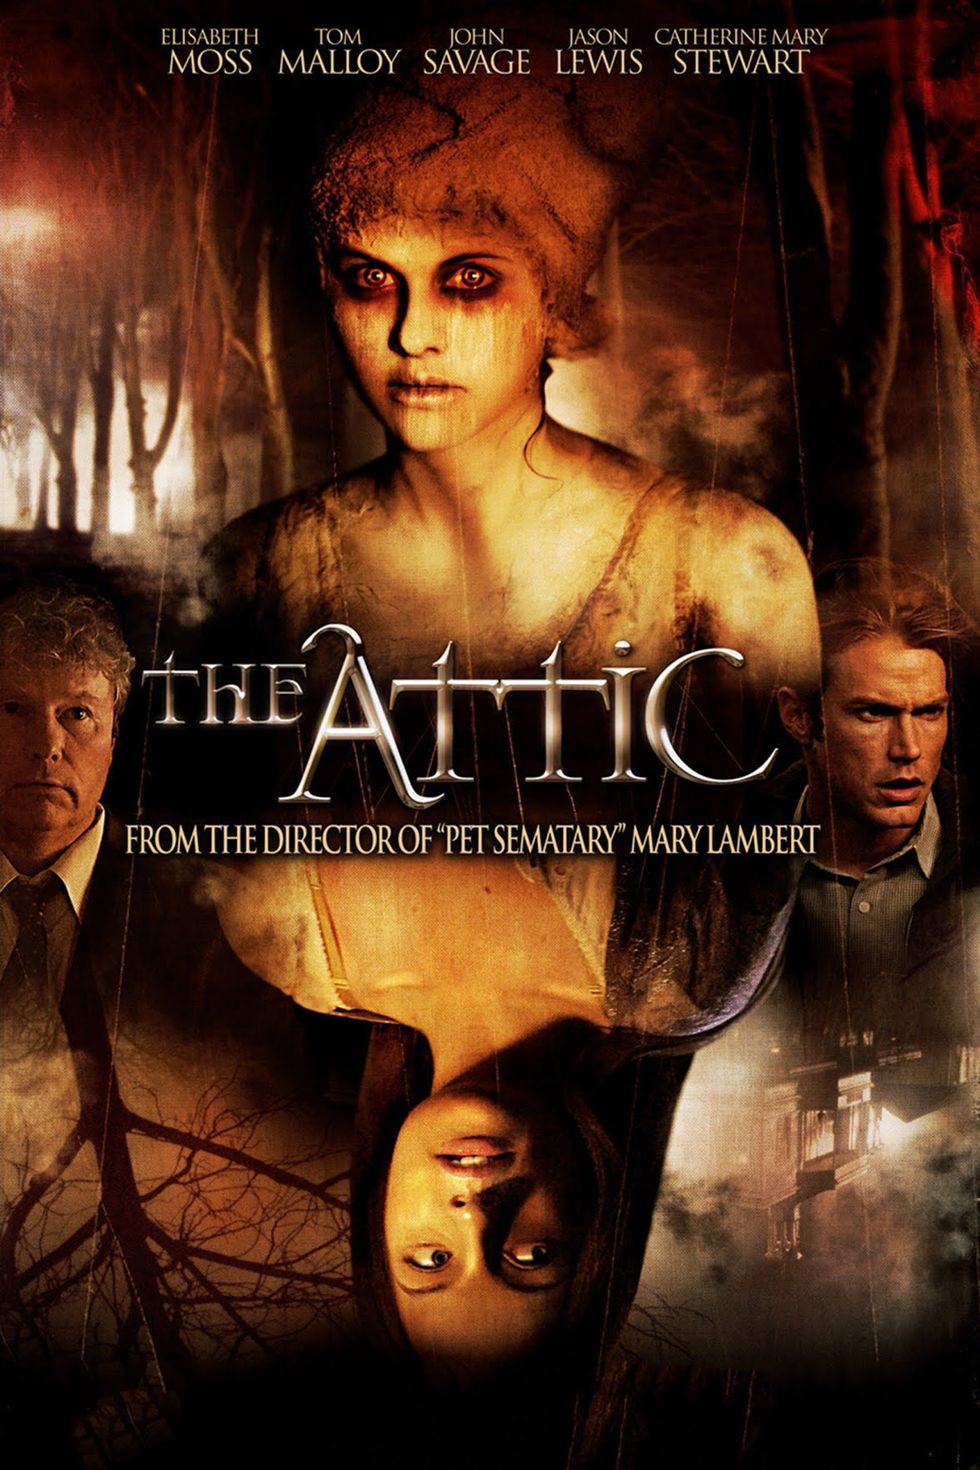 haunted house movies — the attic